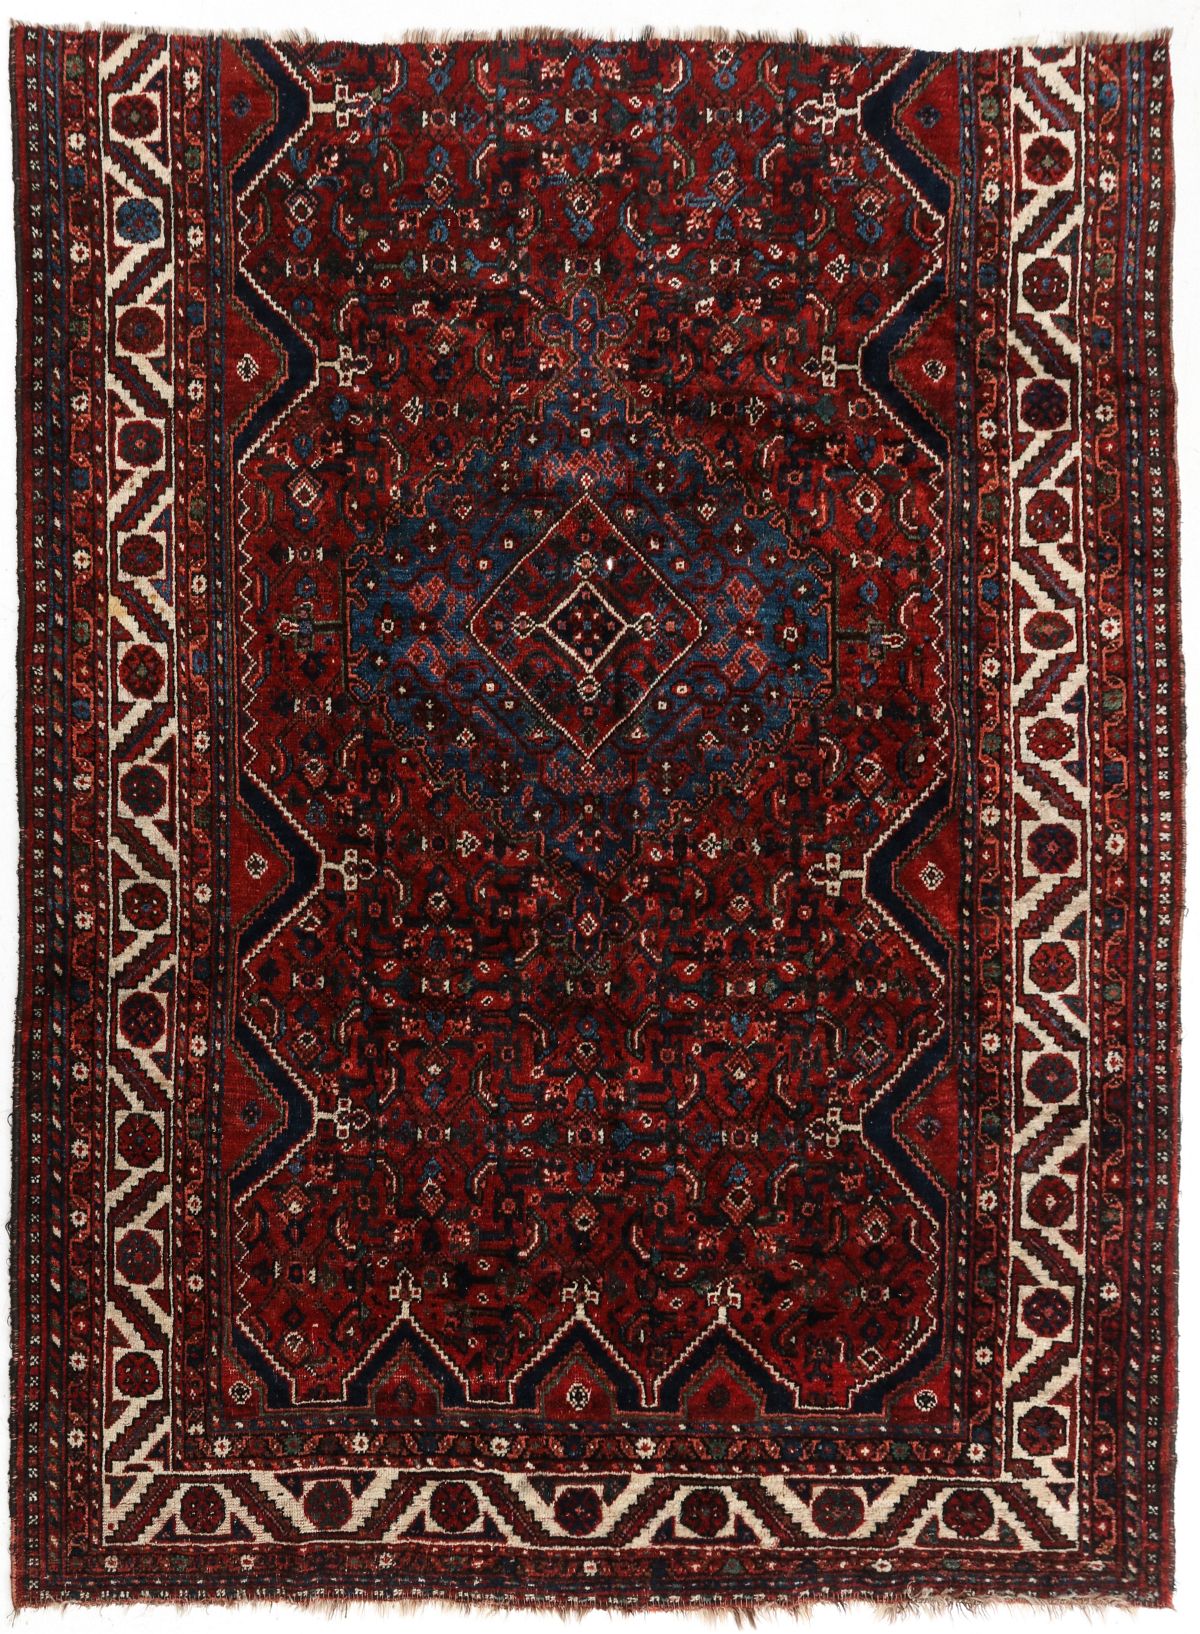 A SOUTHWEST PERSIAN RUG FRAGMENT